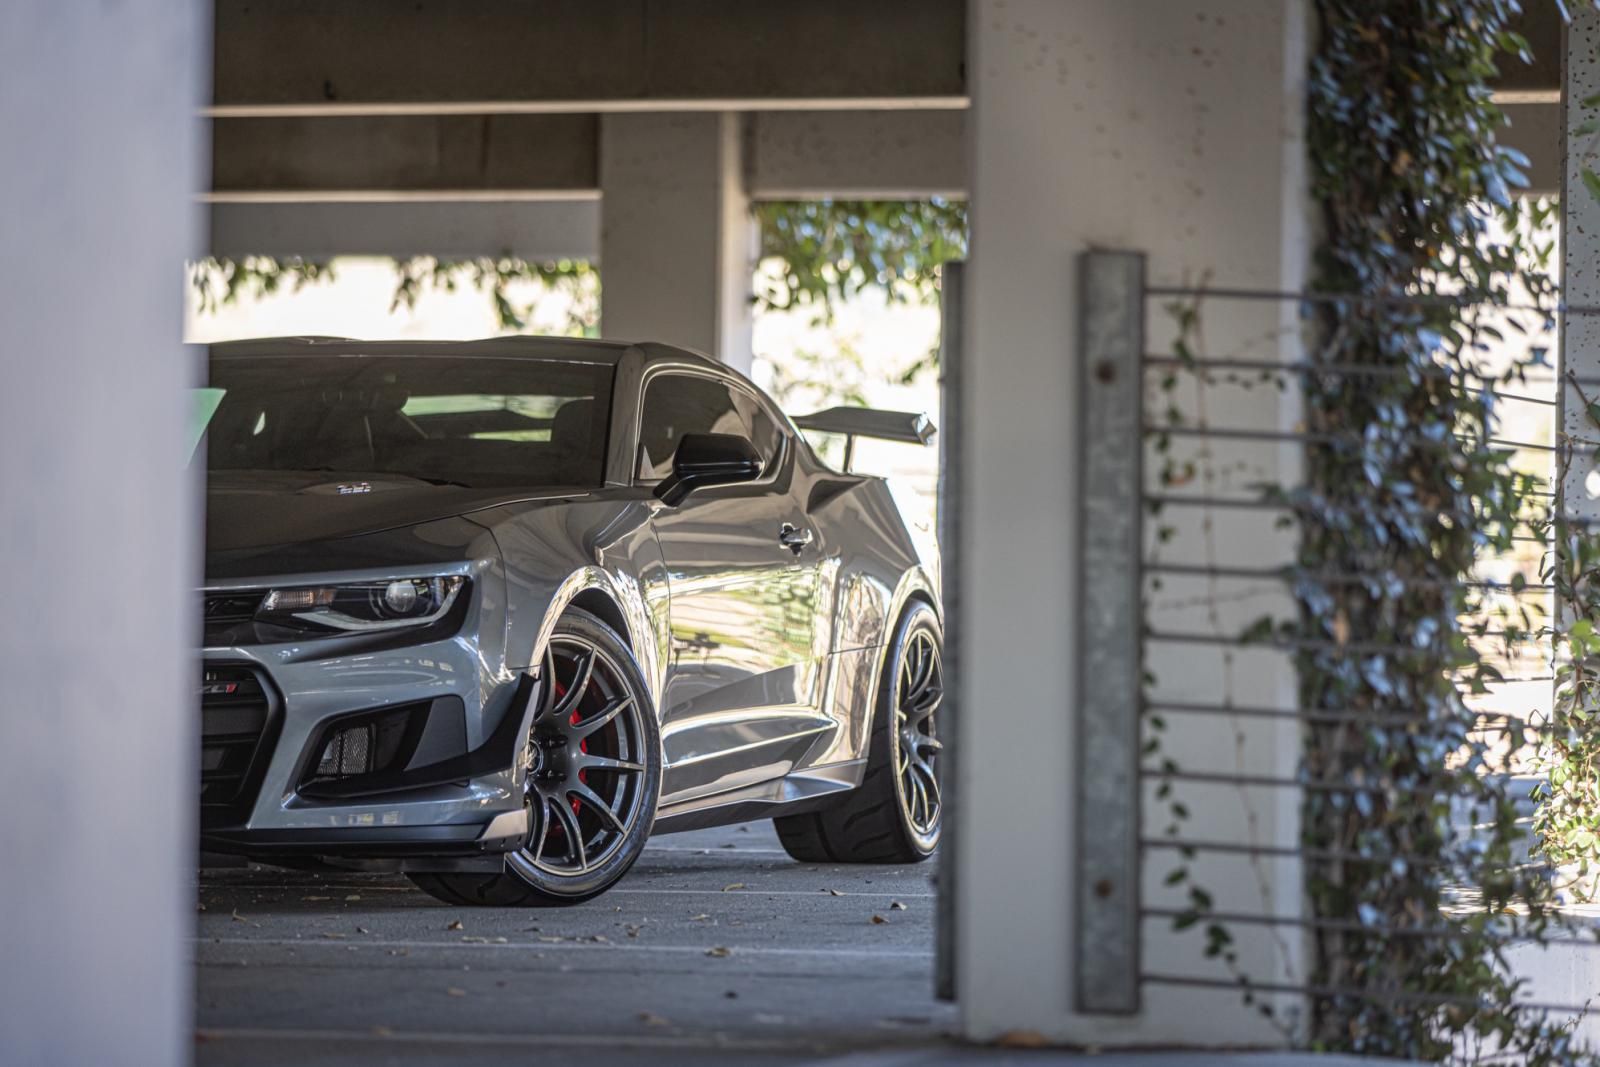 Chevrolet 6th Gen Camaro ZL1 1LE with 19" SM-10 in Anthracite